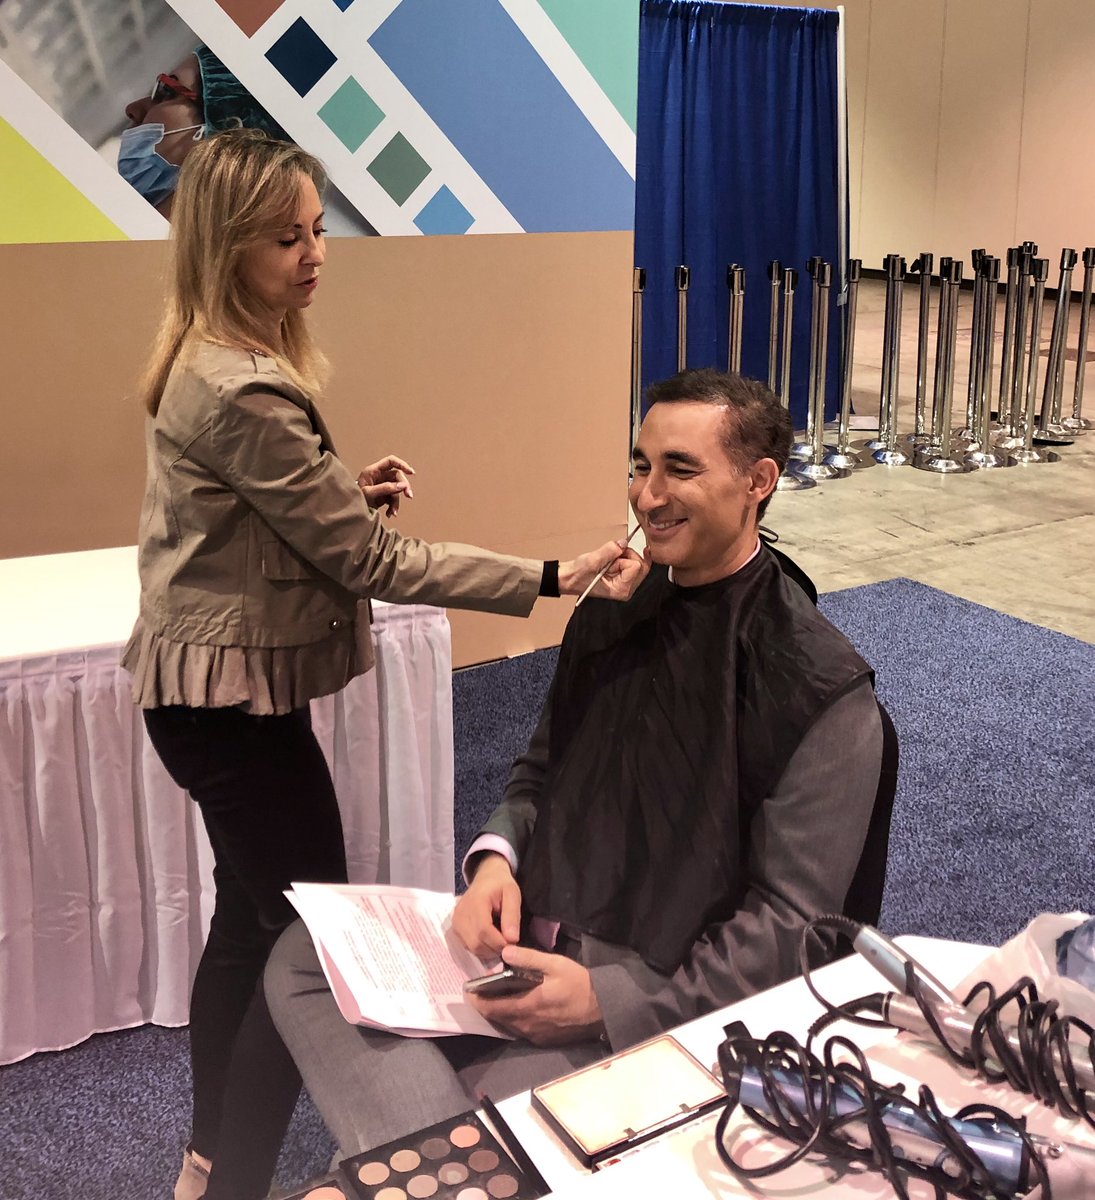 Getting makeovers with @siadaneshmand at #AUA19 .